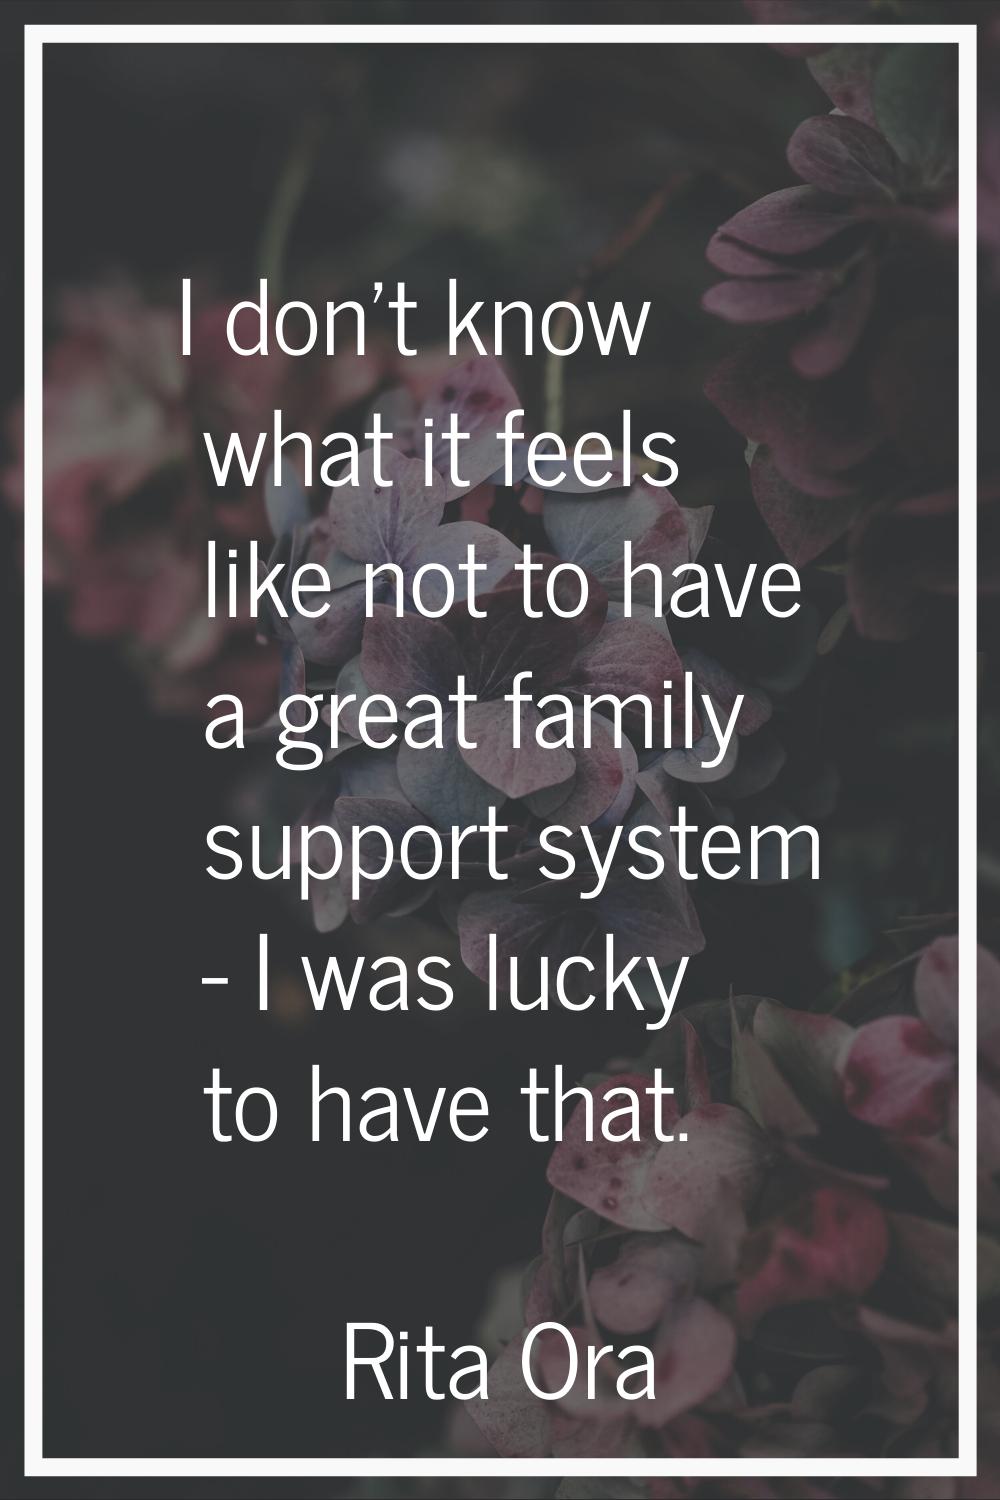 I don't know what it feels like not to have a great family support system - I was lucky to have tha